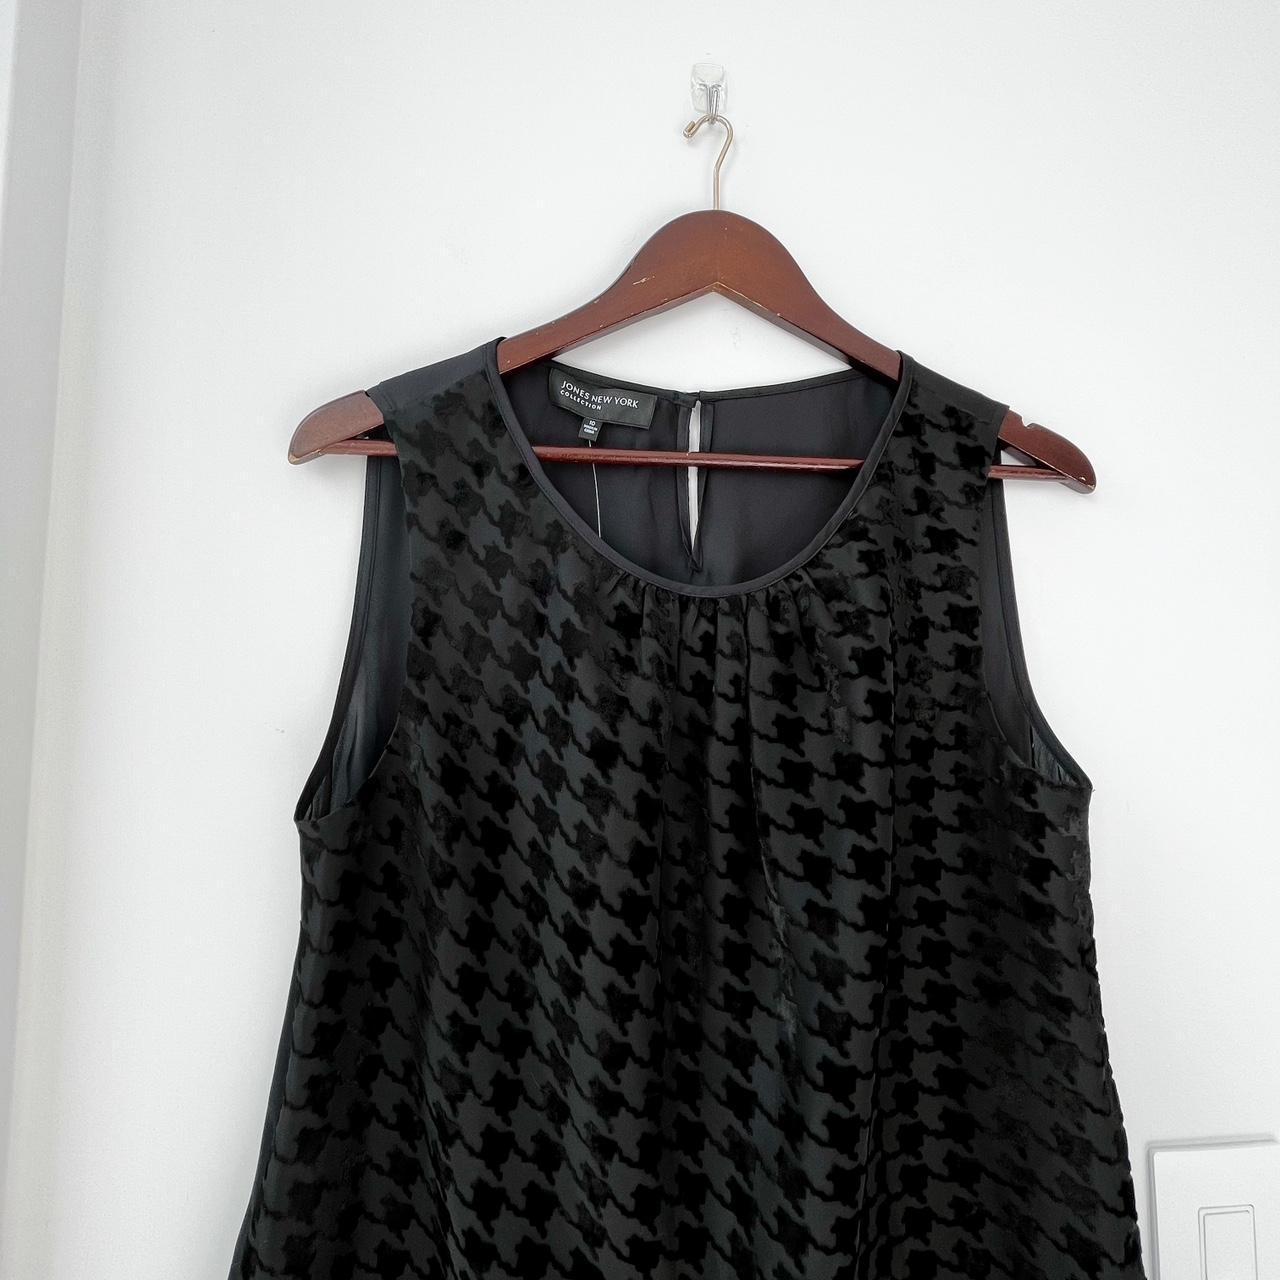 Jones New York Houndstooth Sleeveless Top - new with tag